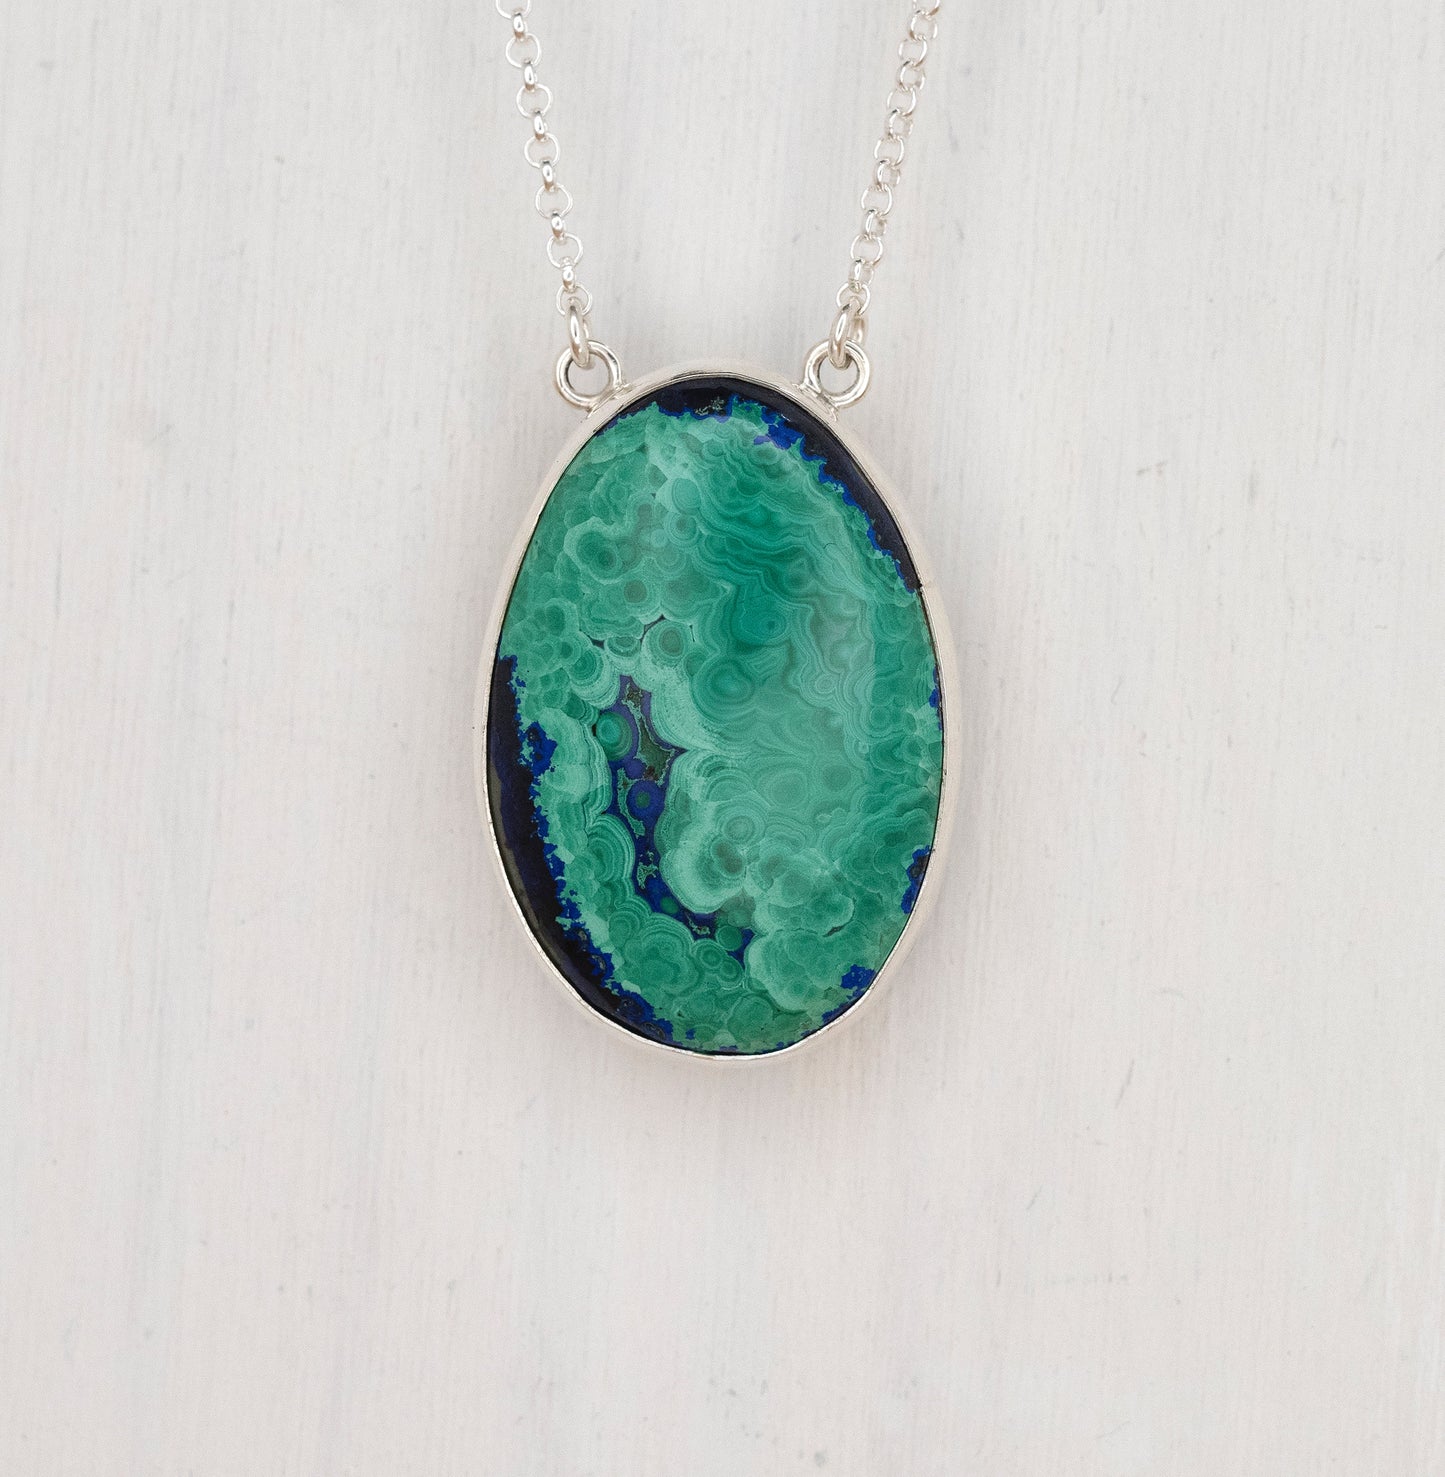 Oval Azurite Malachite Pendant with Sprout